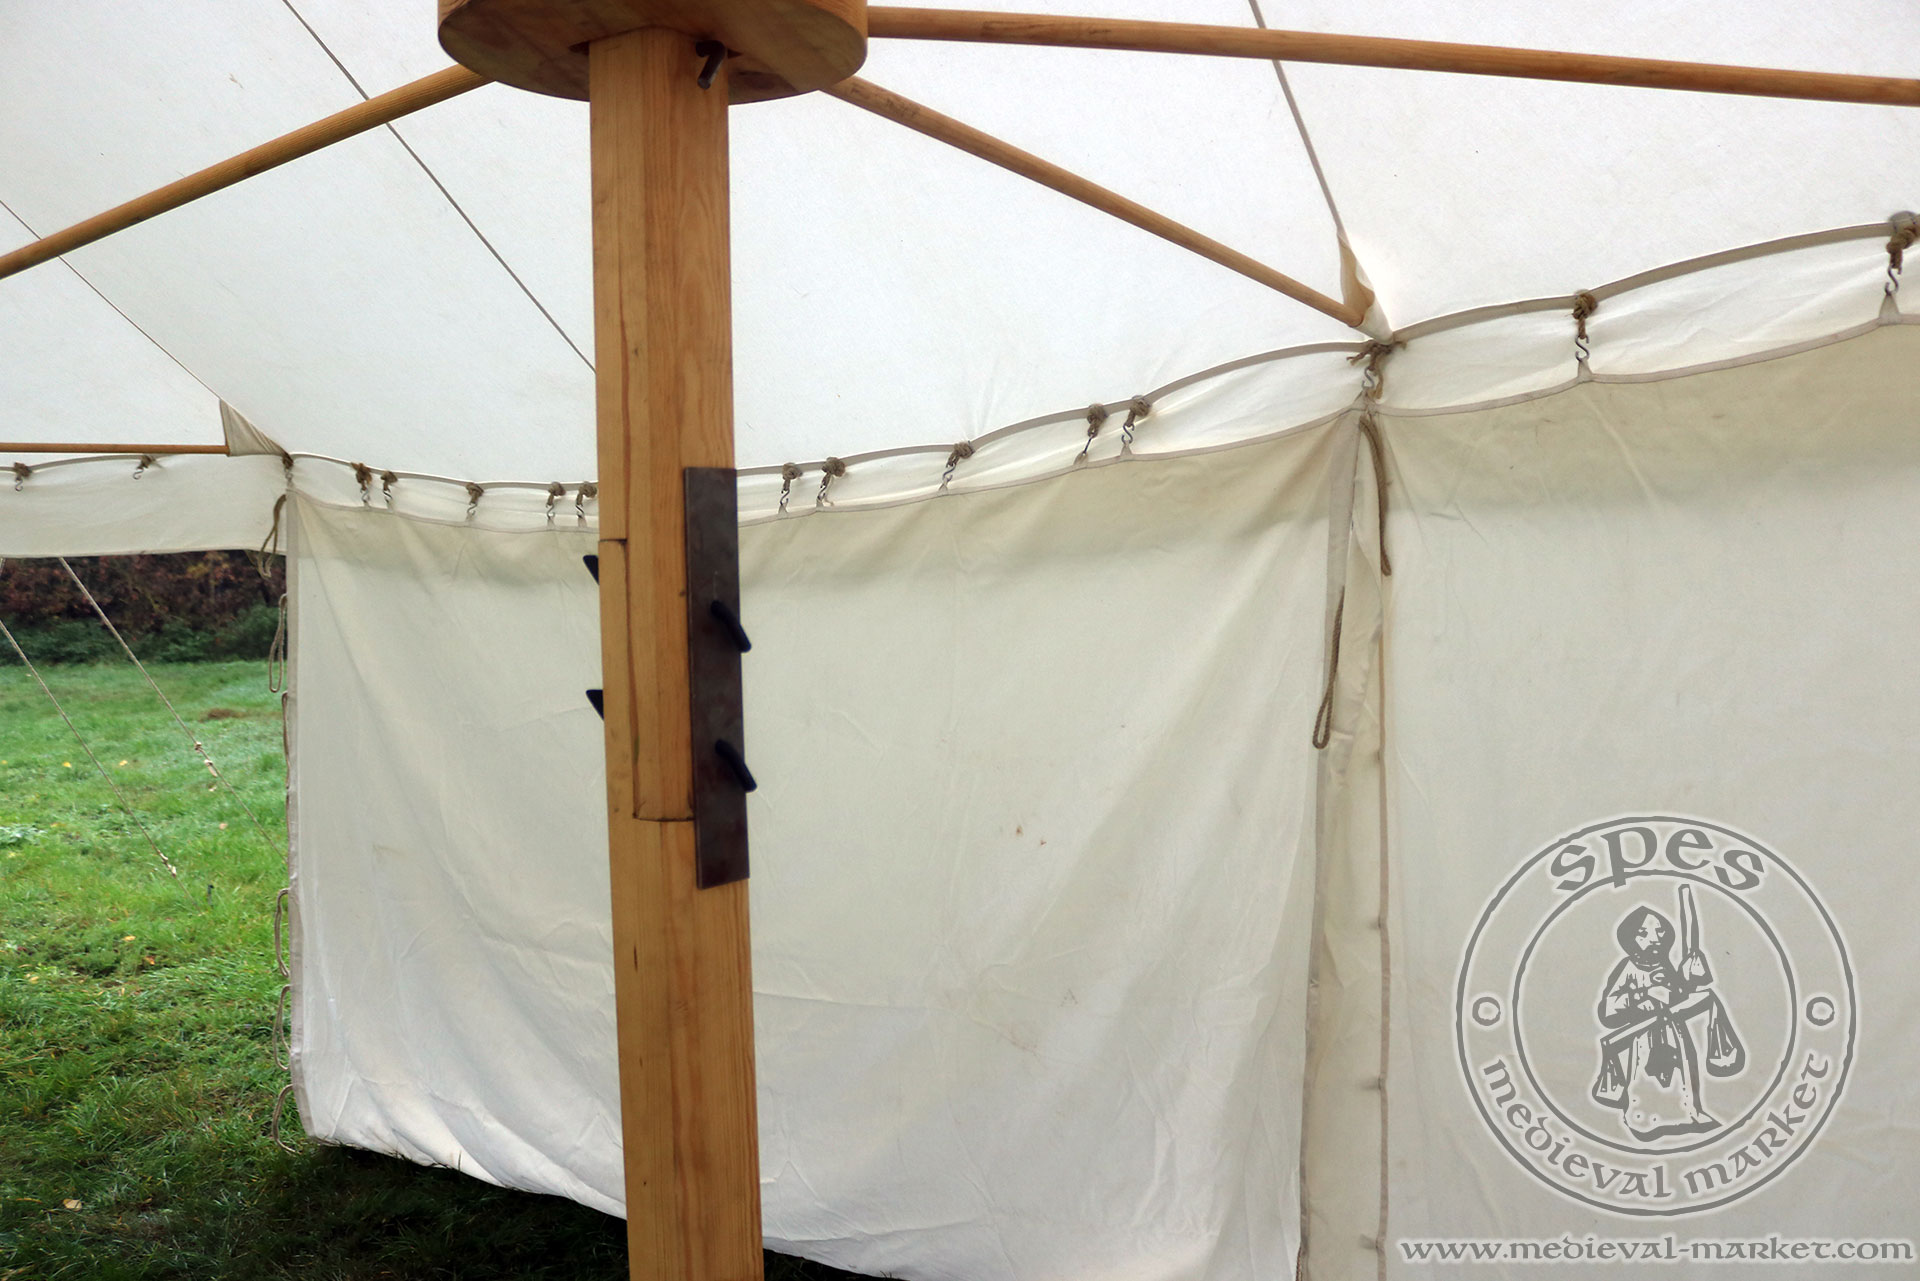 Umbrella tent with two poles (7 x 4 m) - cotton. MEDIEVAL MARKET - SPES.